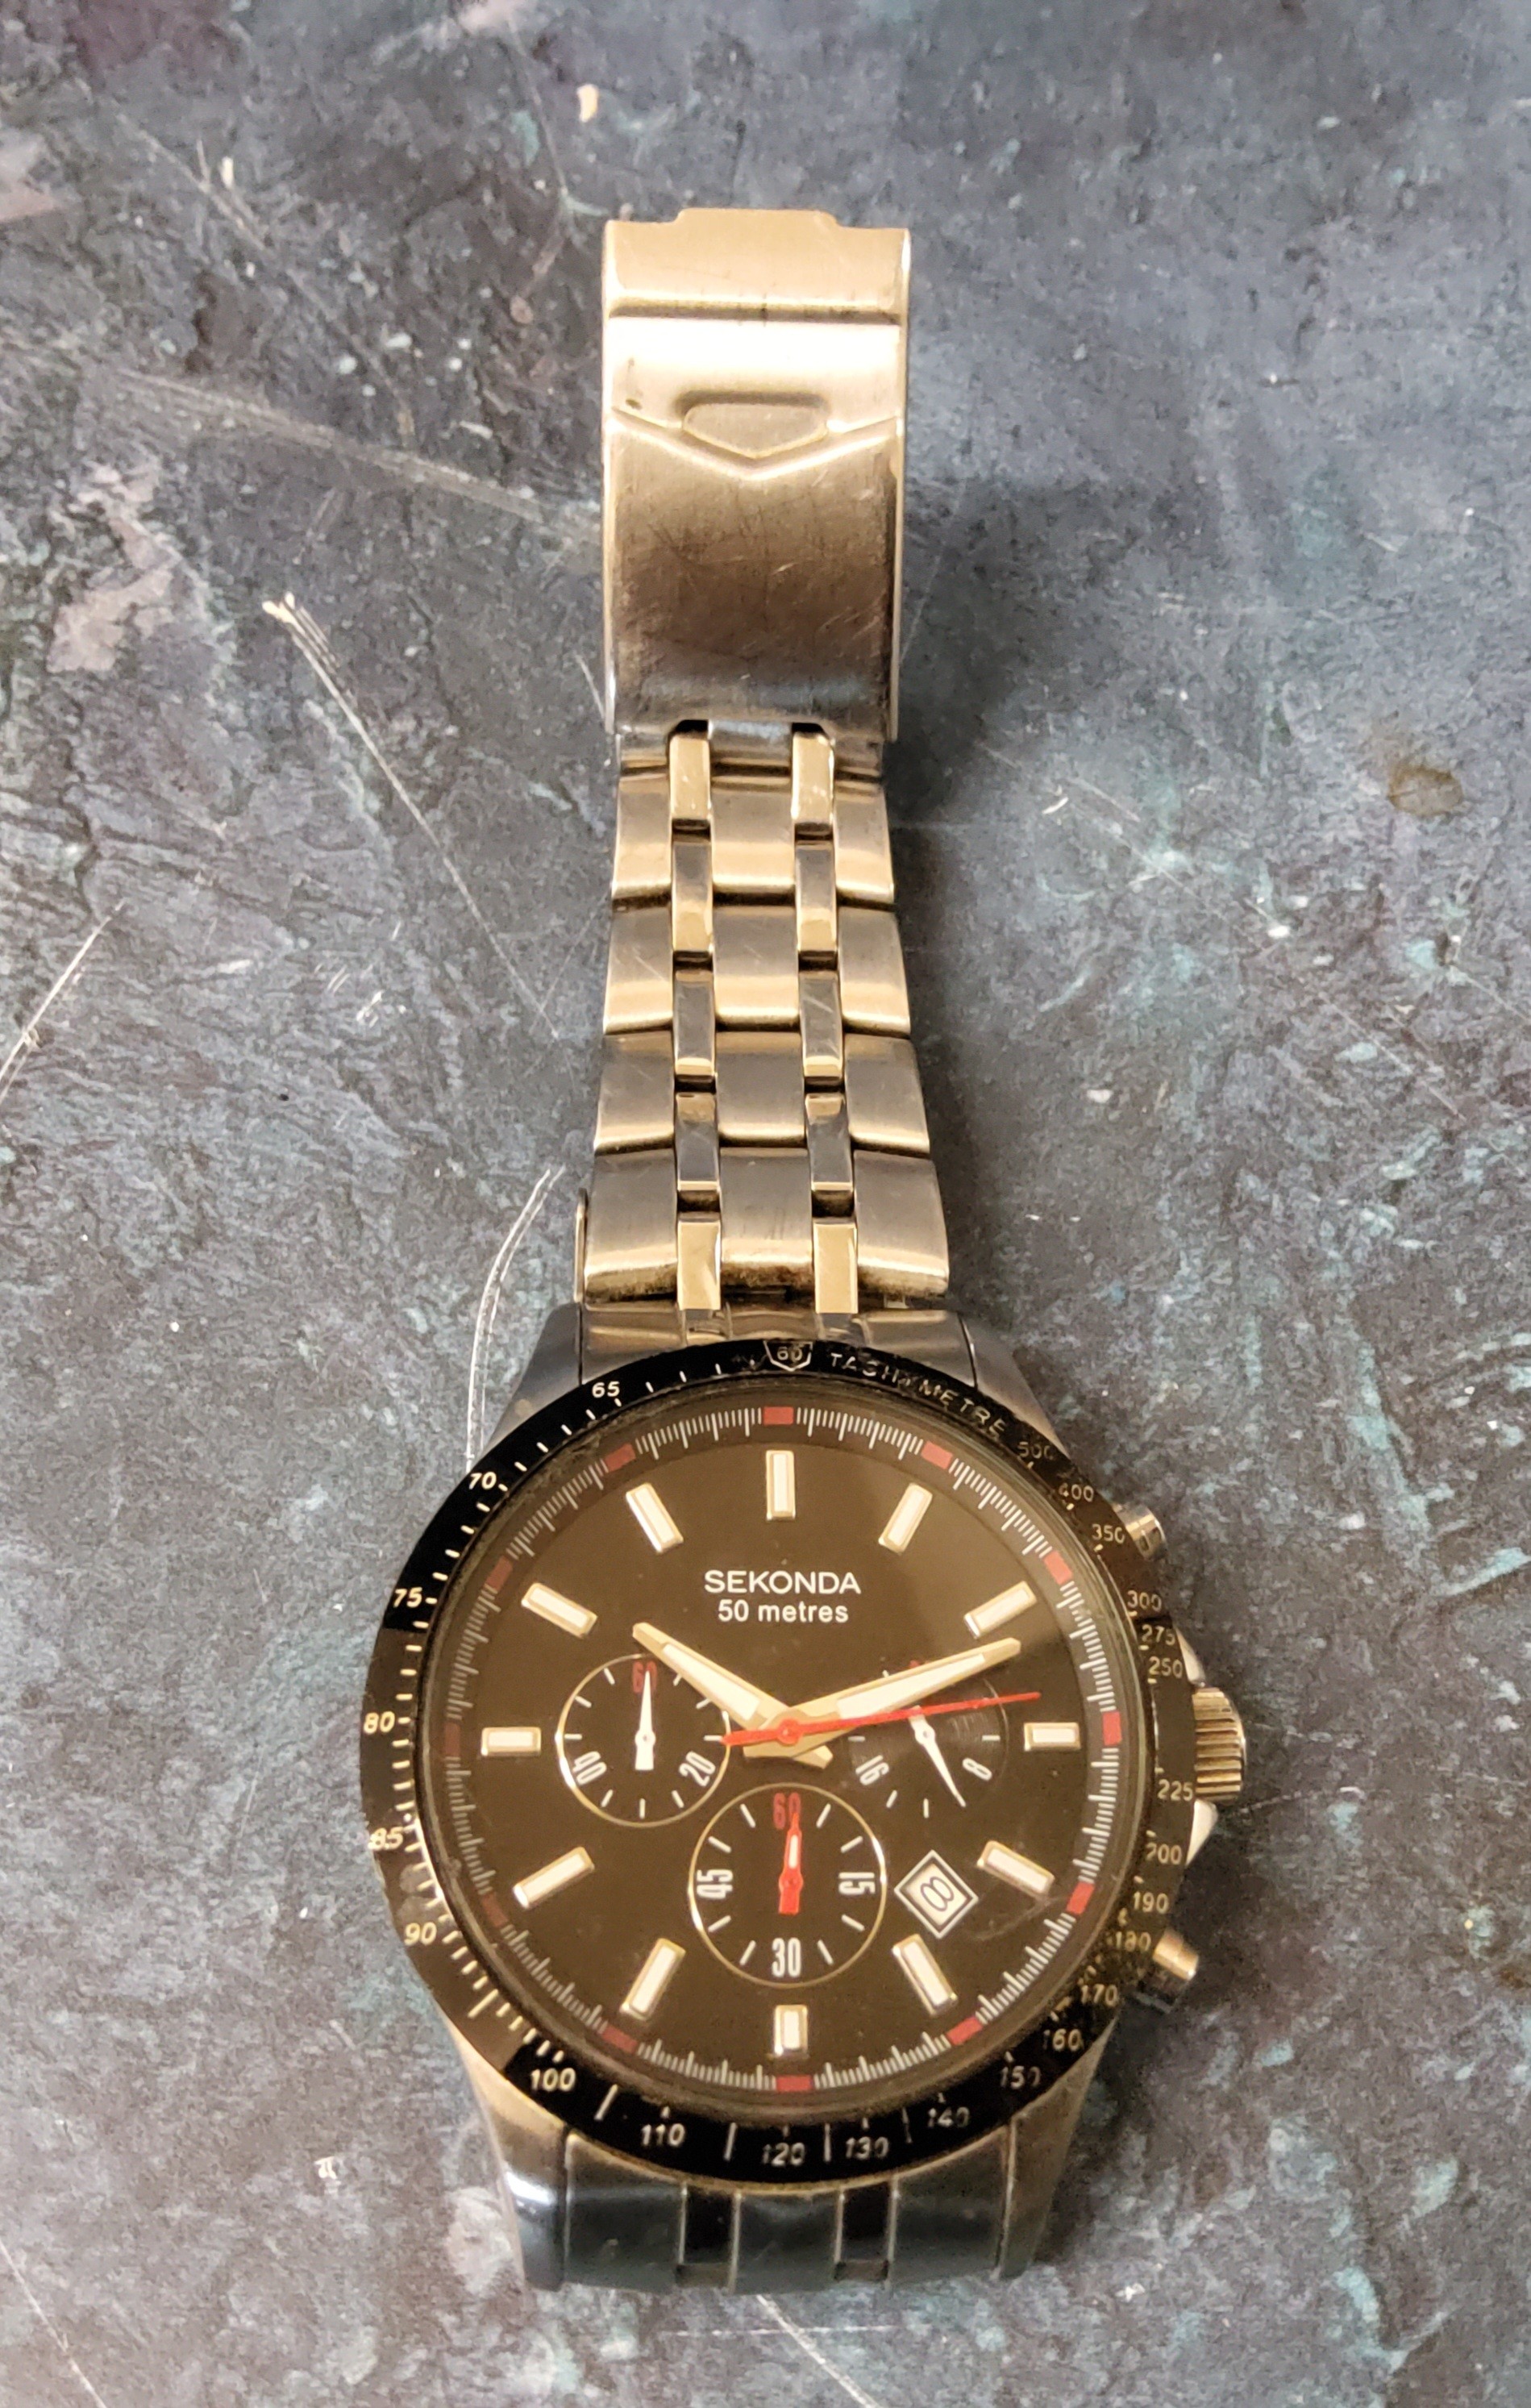 A Sekonda 50 metres diver's watch, stainless steel case